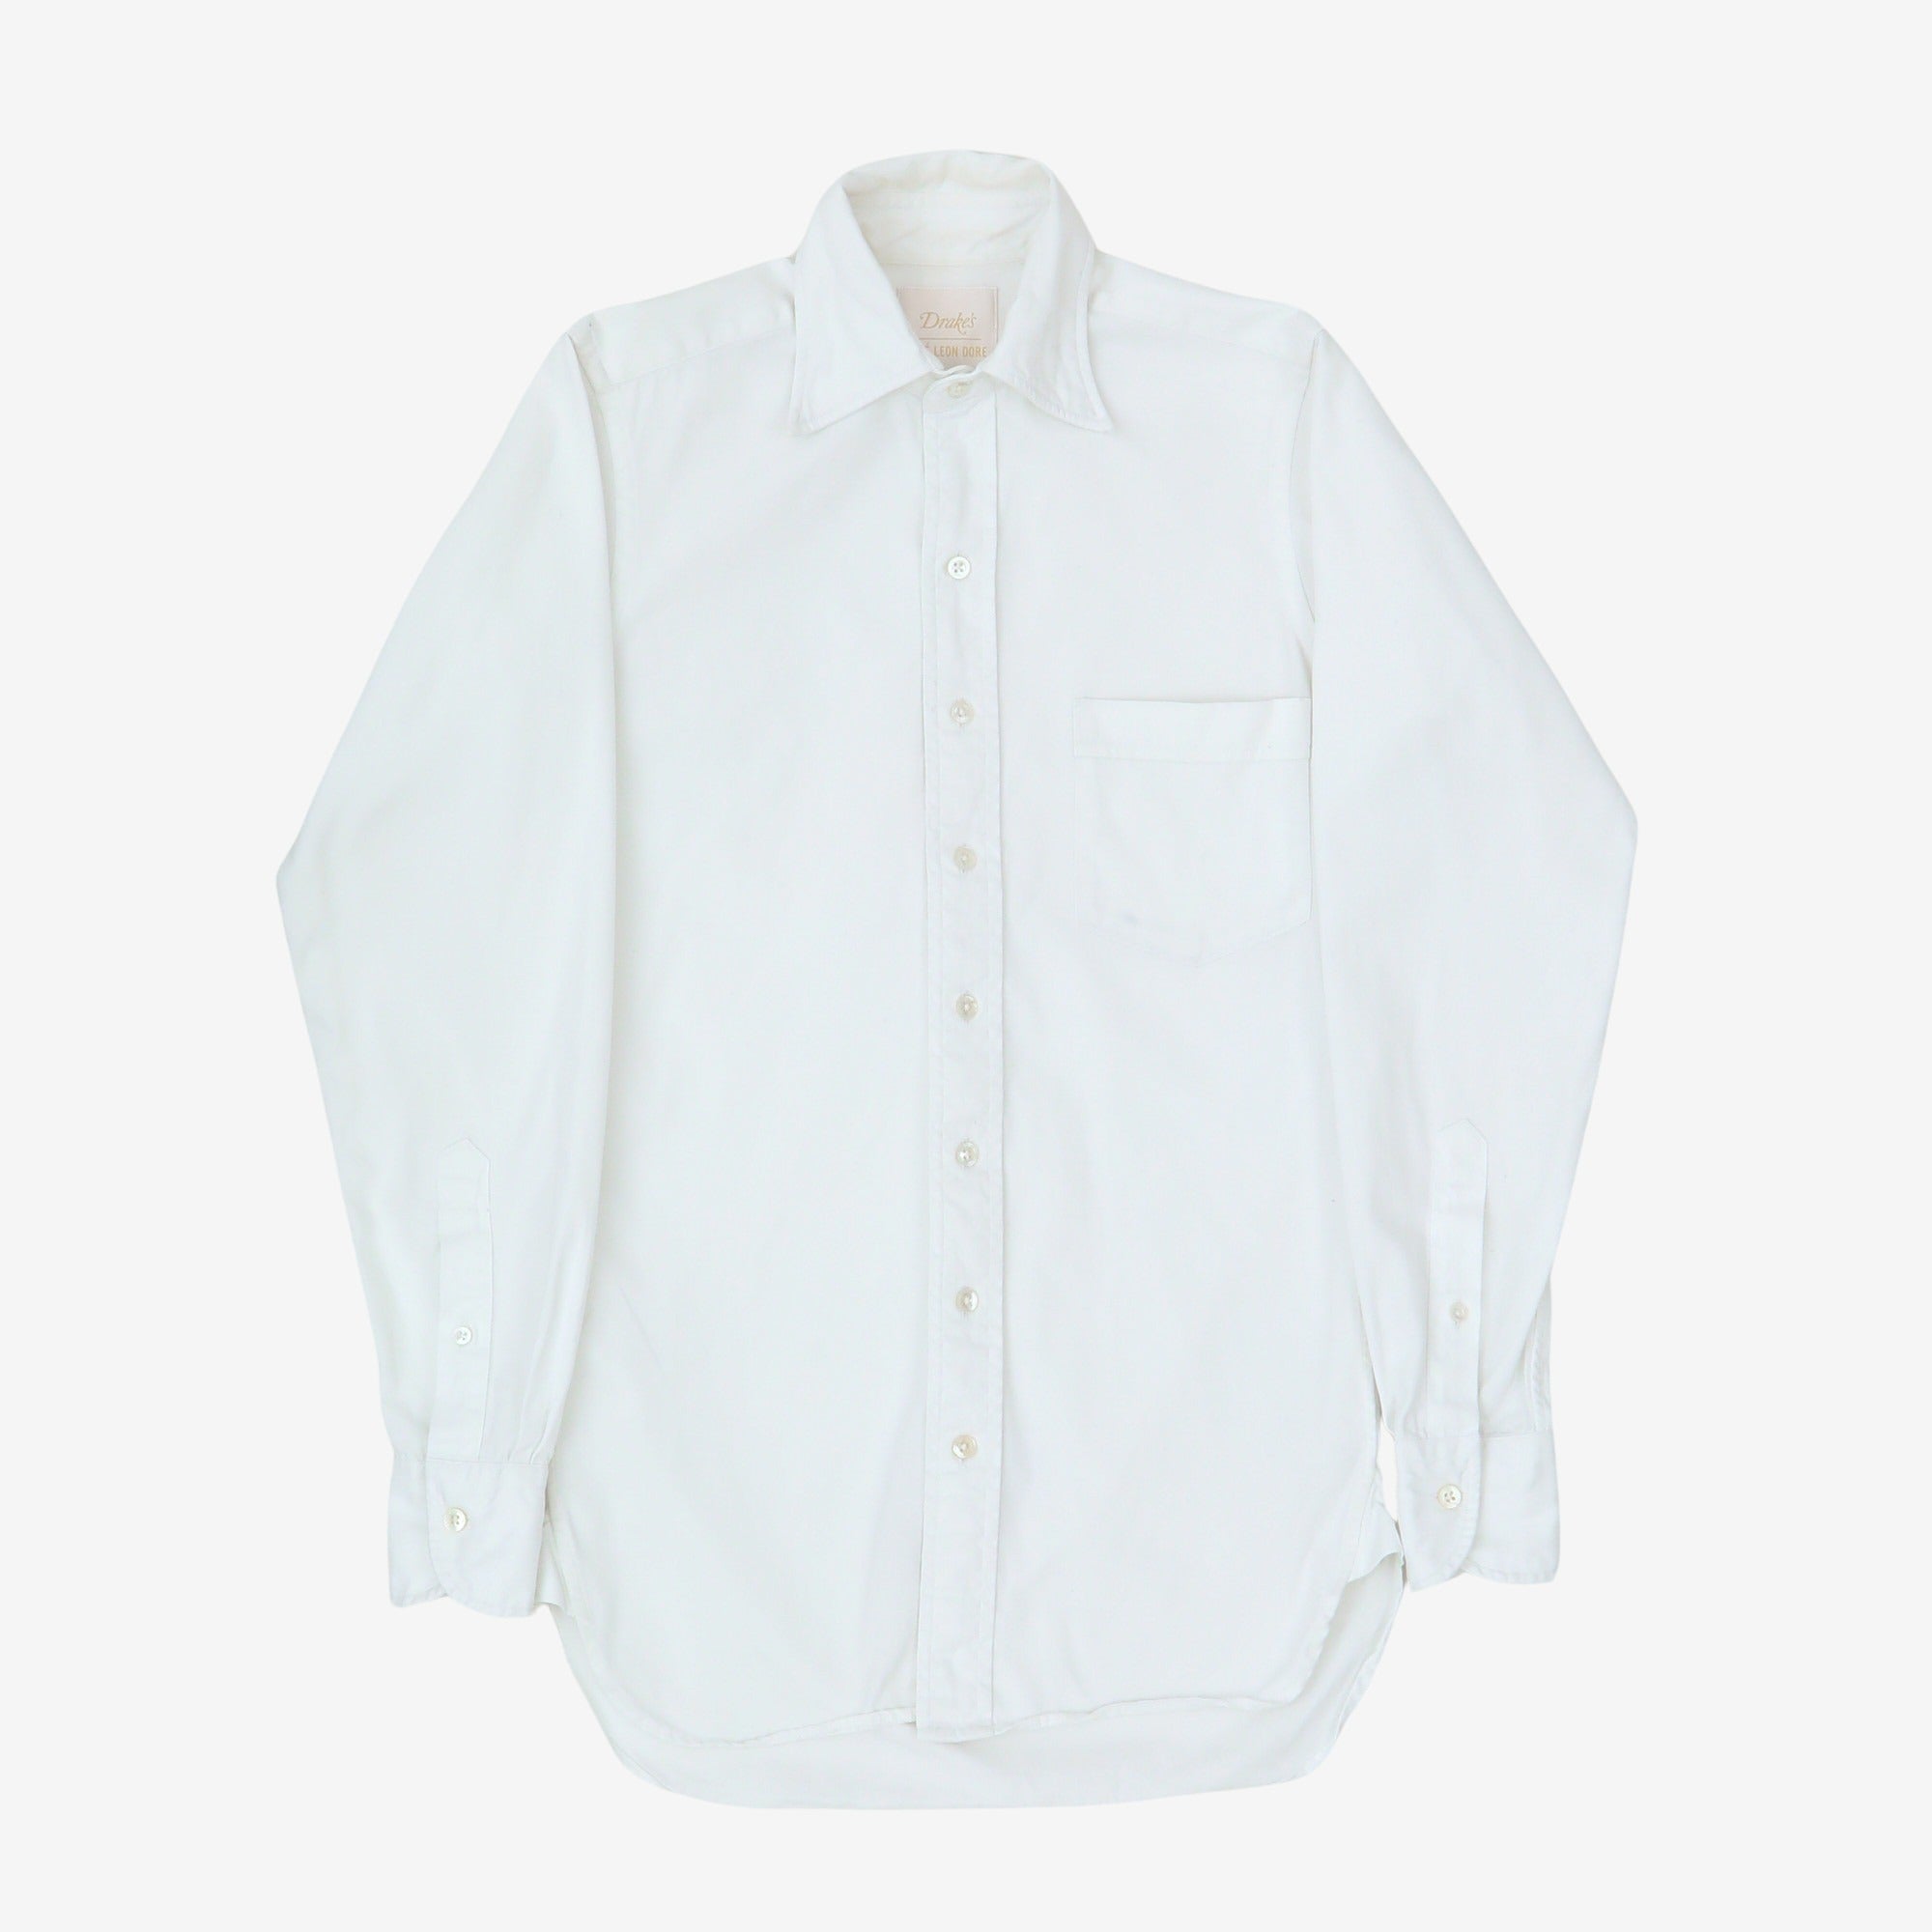 ALD Pocket Shirt (Stained)